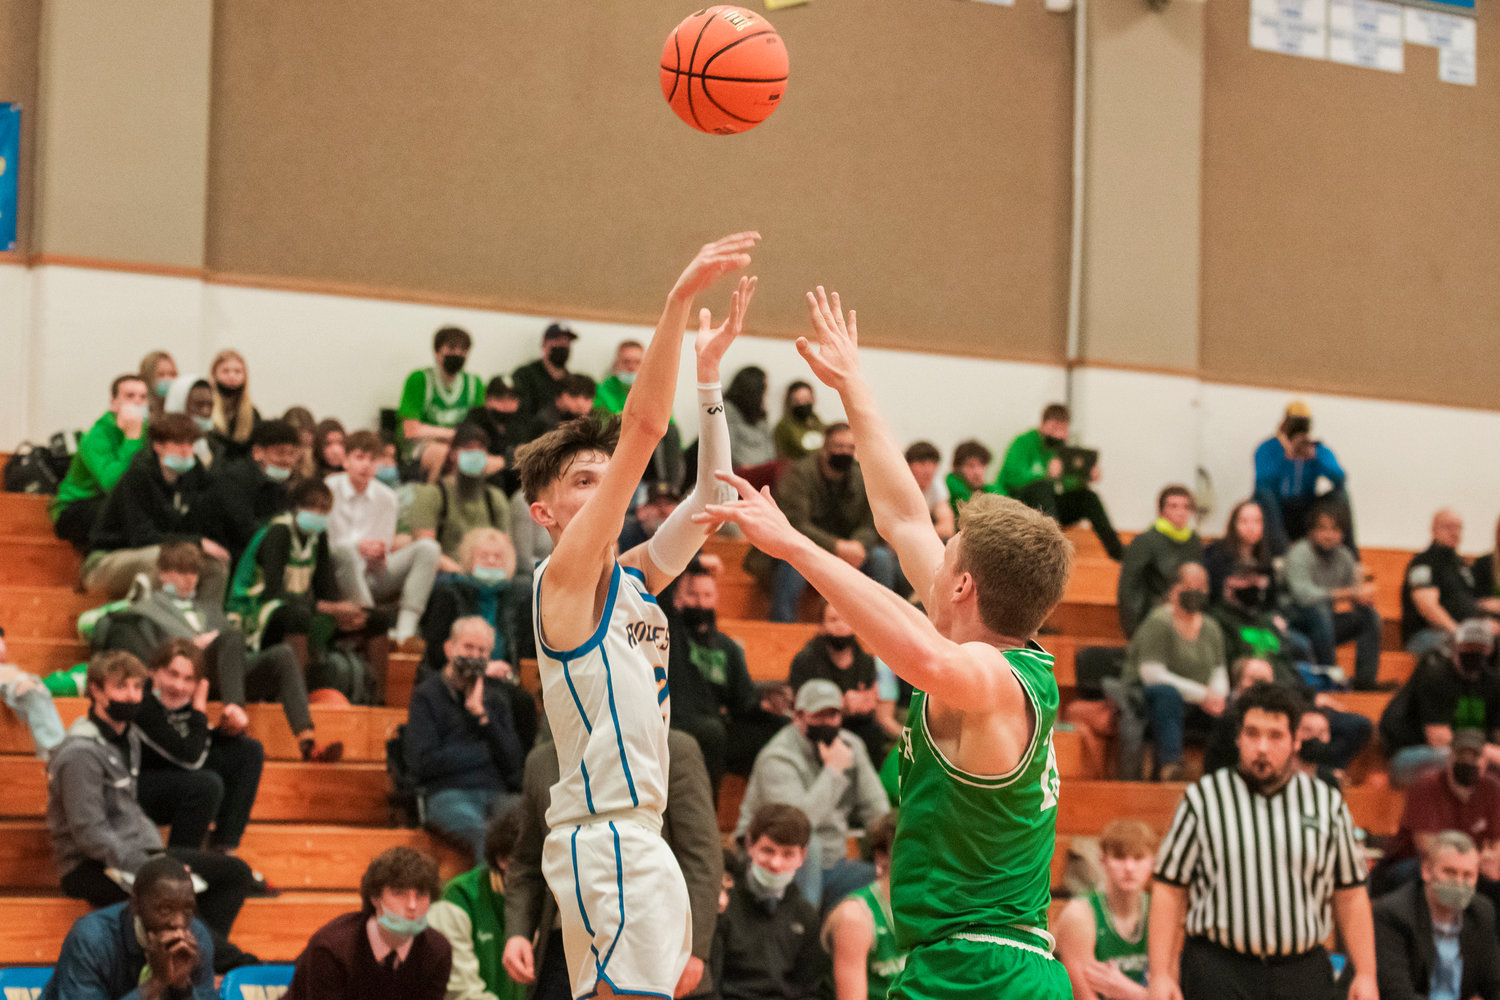 Rochester’s Tyler Klatush (2) shoots a three-point shot during a game Wednesday night against Tumwater.